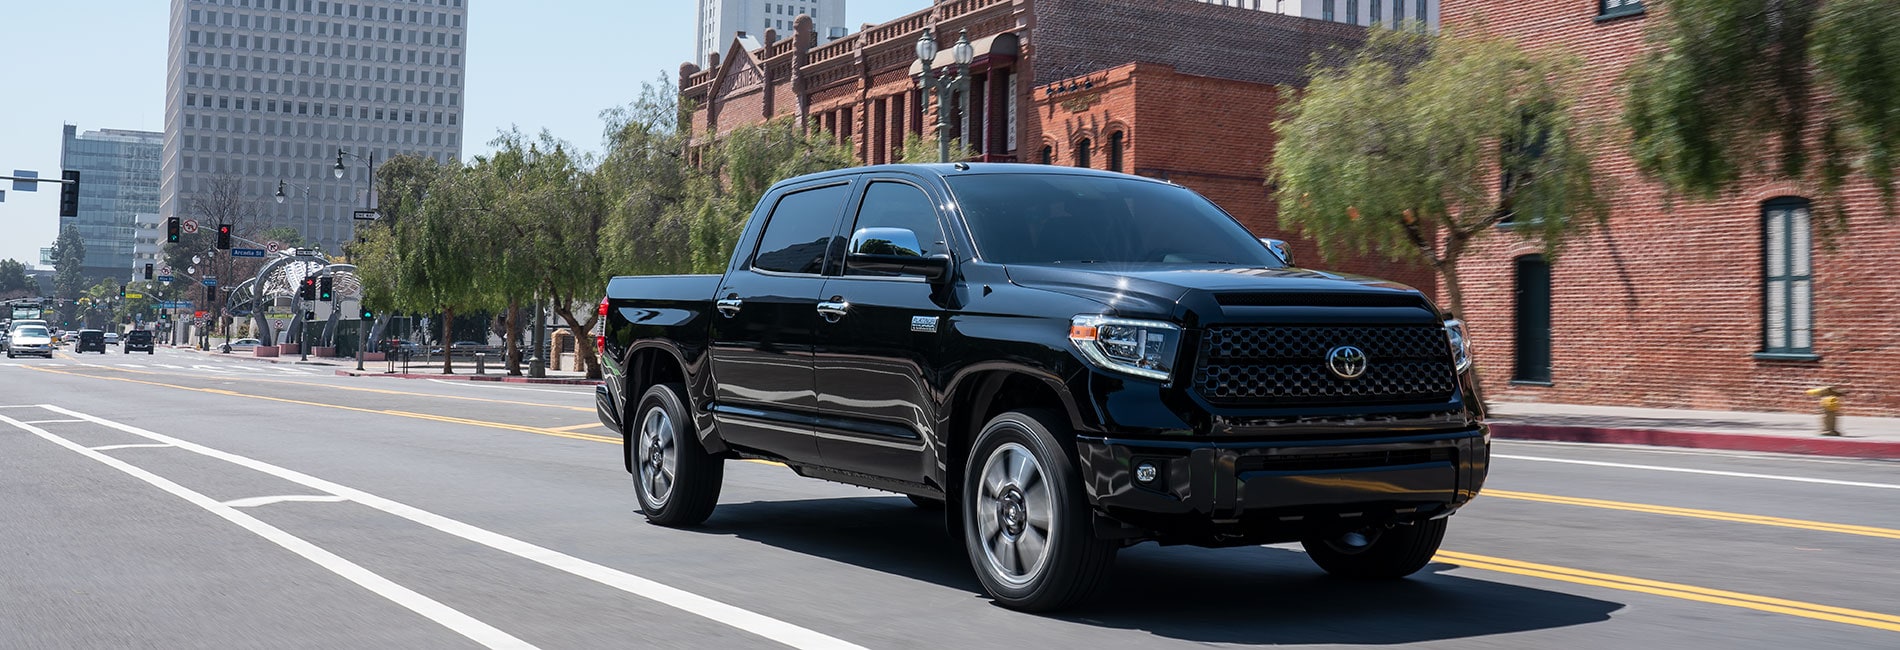 Toyota Tundra Exterior Vehicle Features